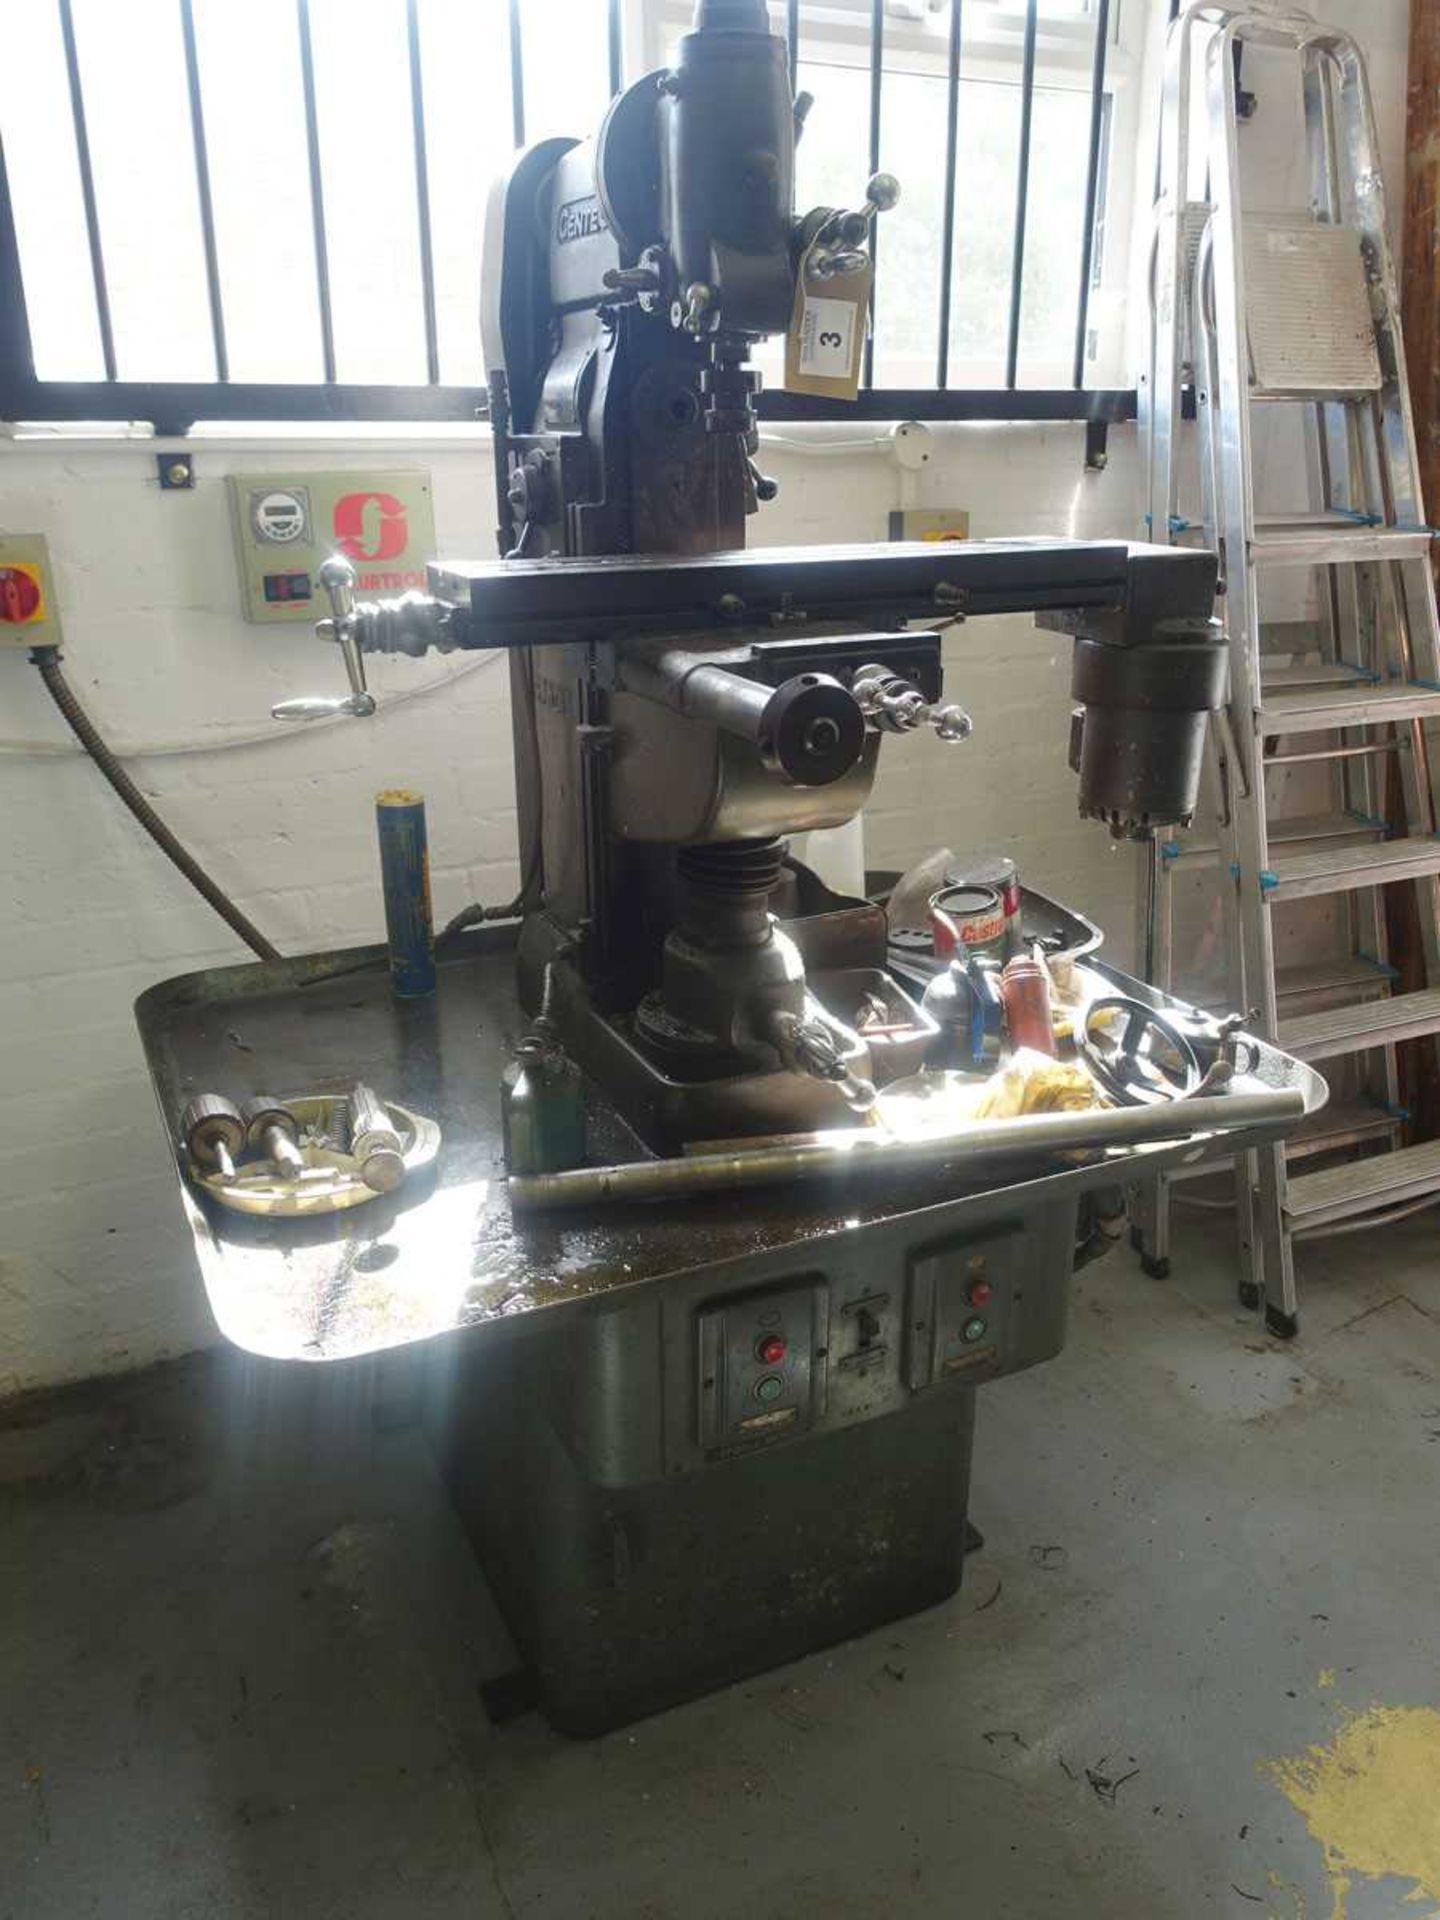 +VAT Centec 2B vertical and horizontal milling machine. Serial number: 5552 Fitted with power - Image 2 of 4